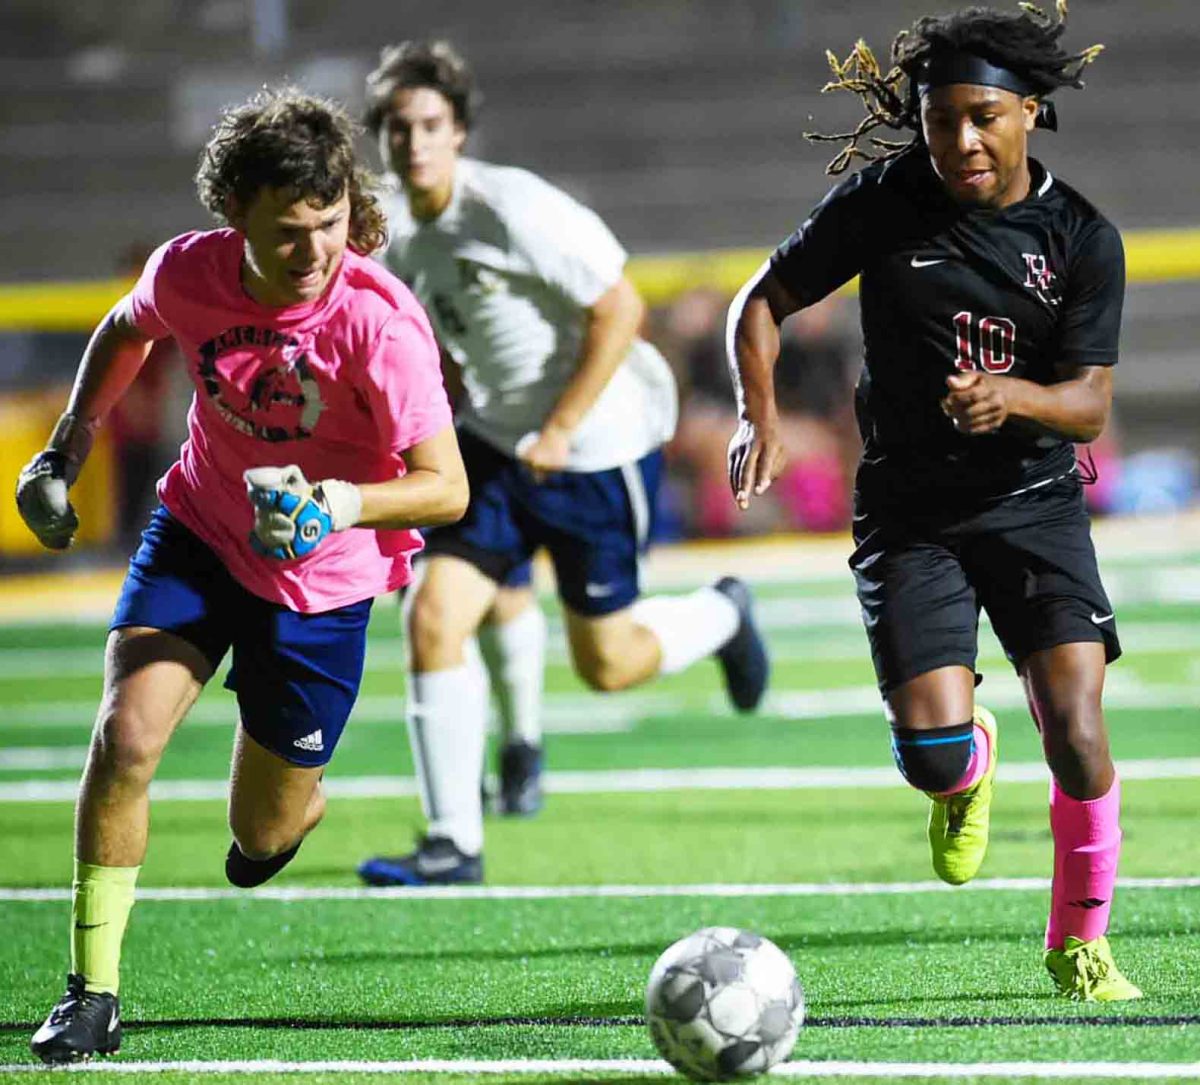 Harlan County junior Ray Splawn raced down the field in 50th District Tournament action Tuesday. Splawn scored three goals in the Bears 8-0 victory over Knox Central.